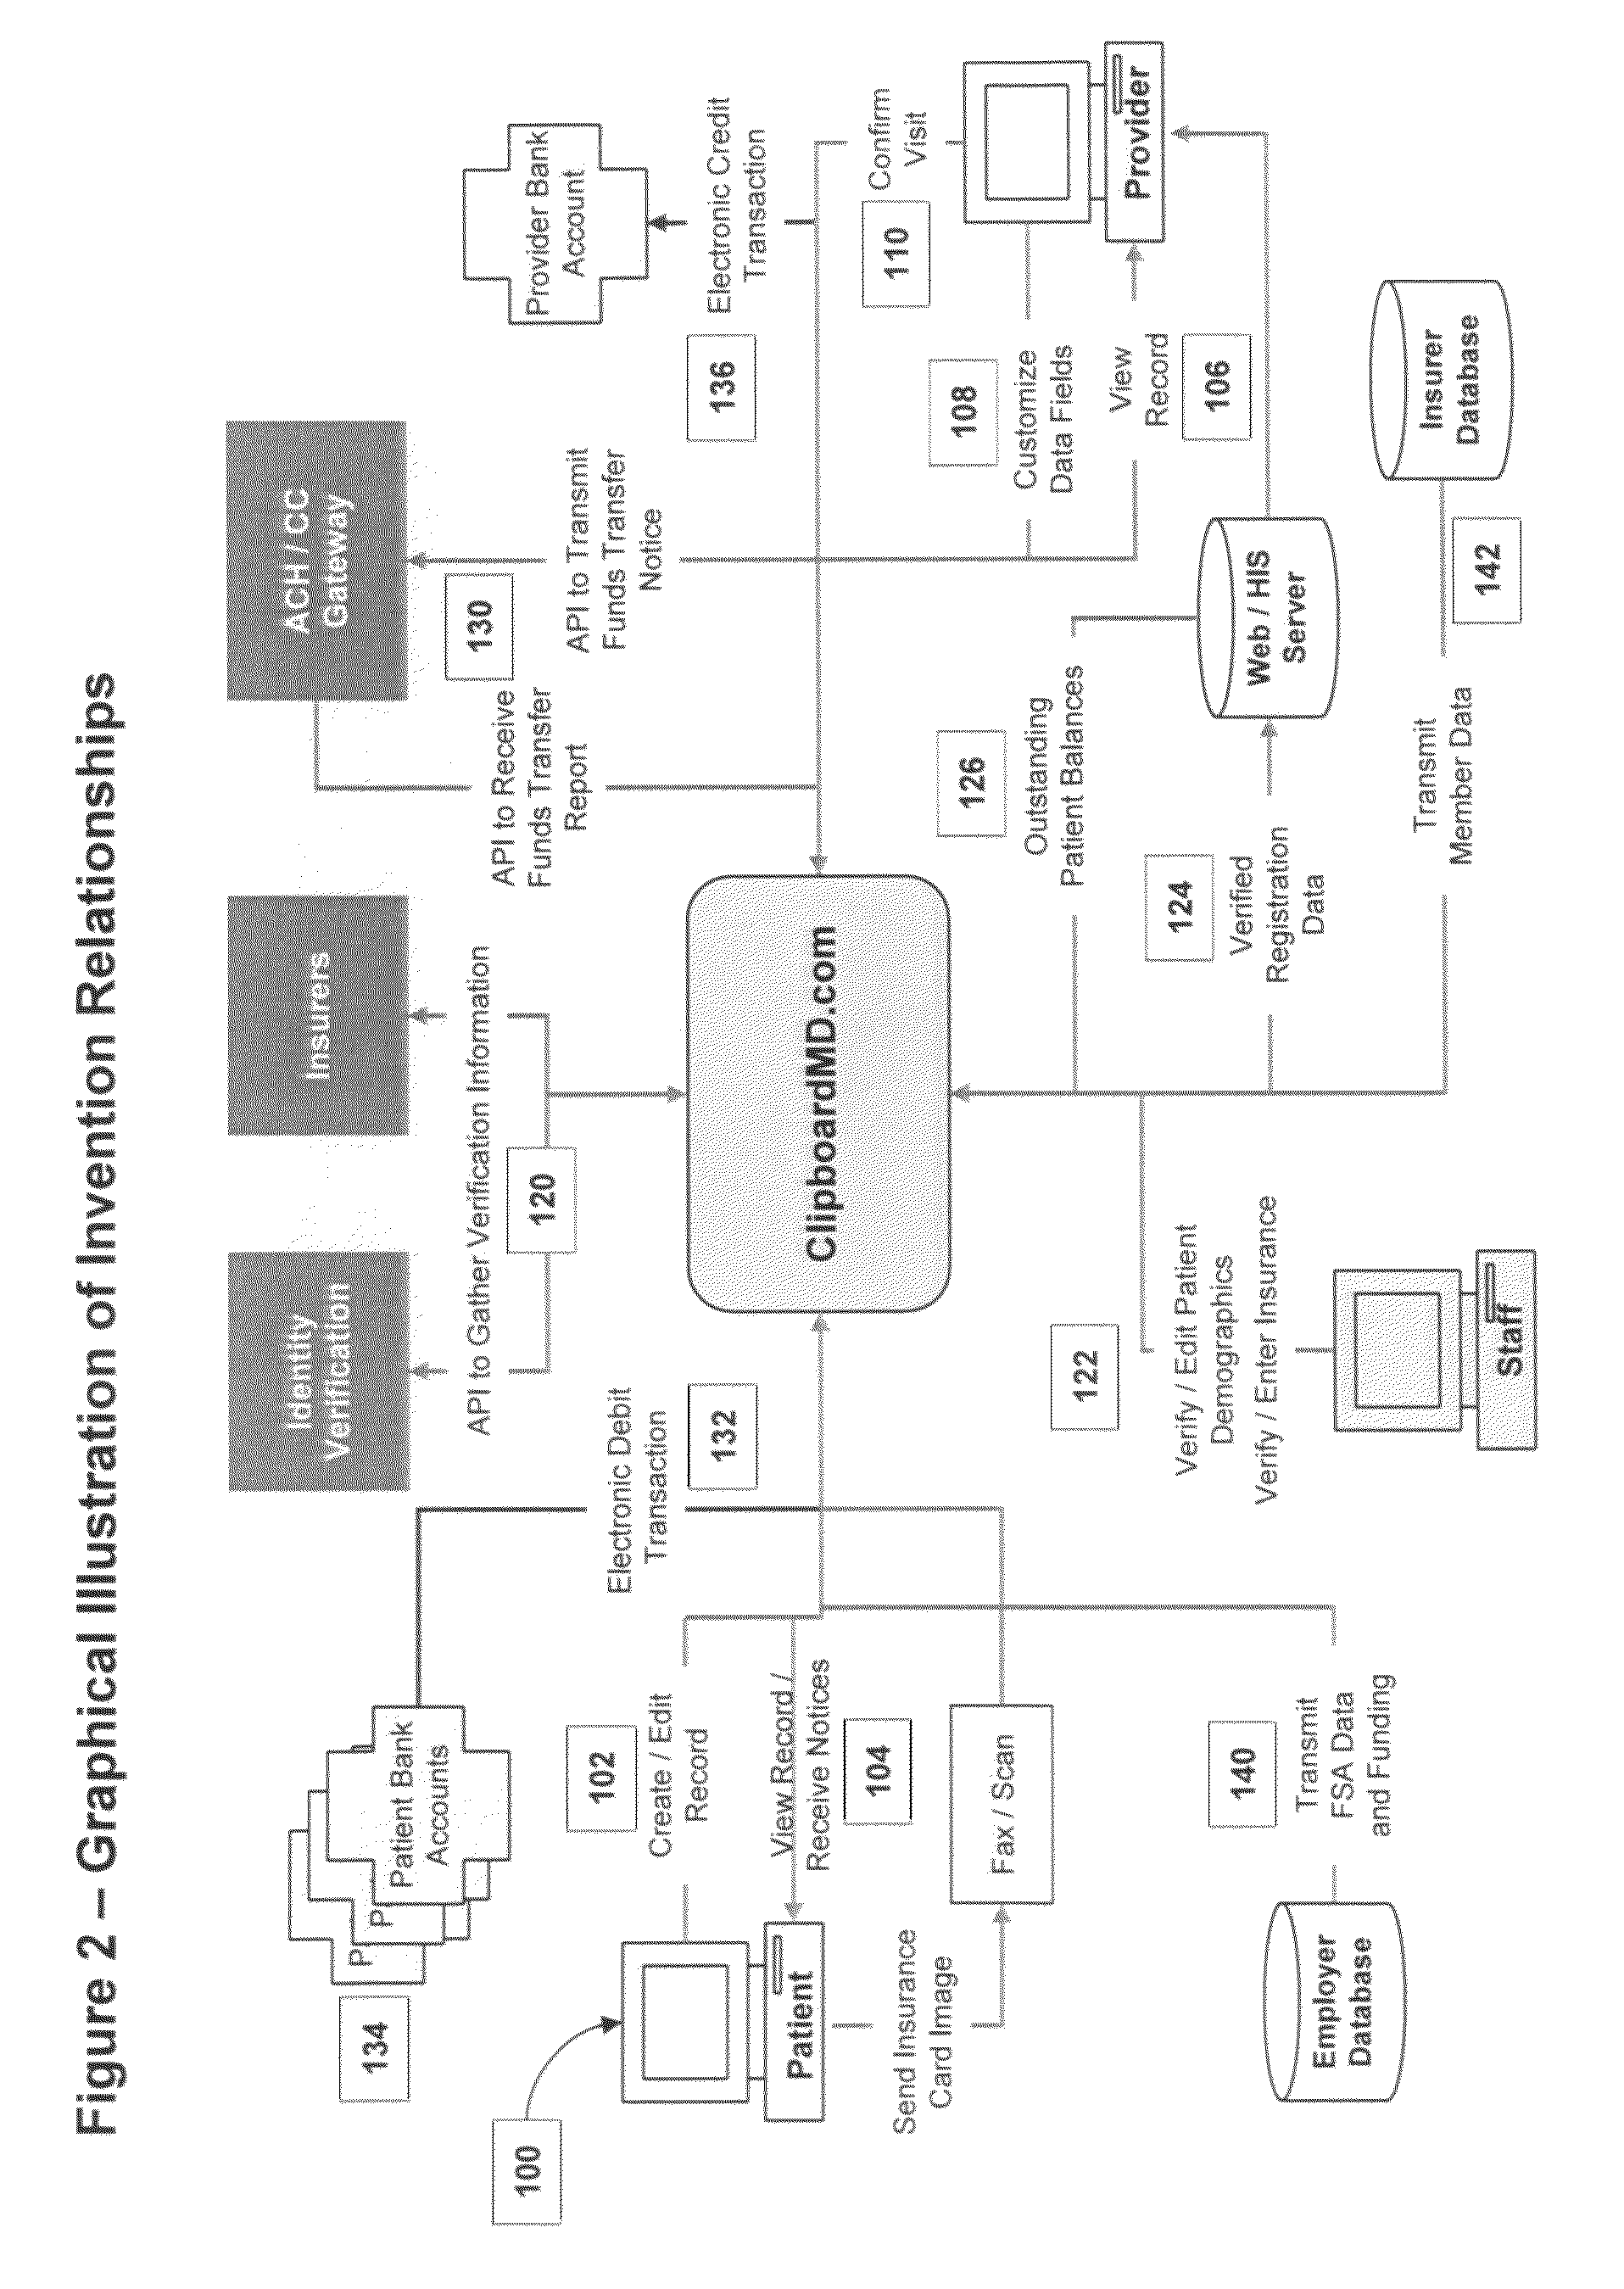 Electronic patient registration verification and payment system and method